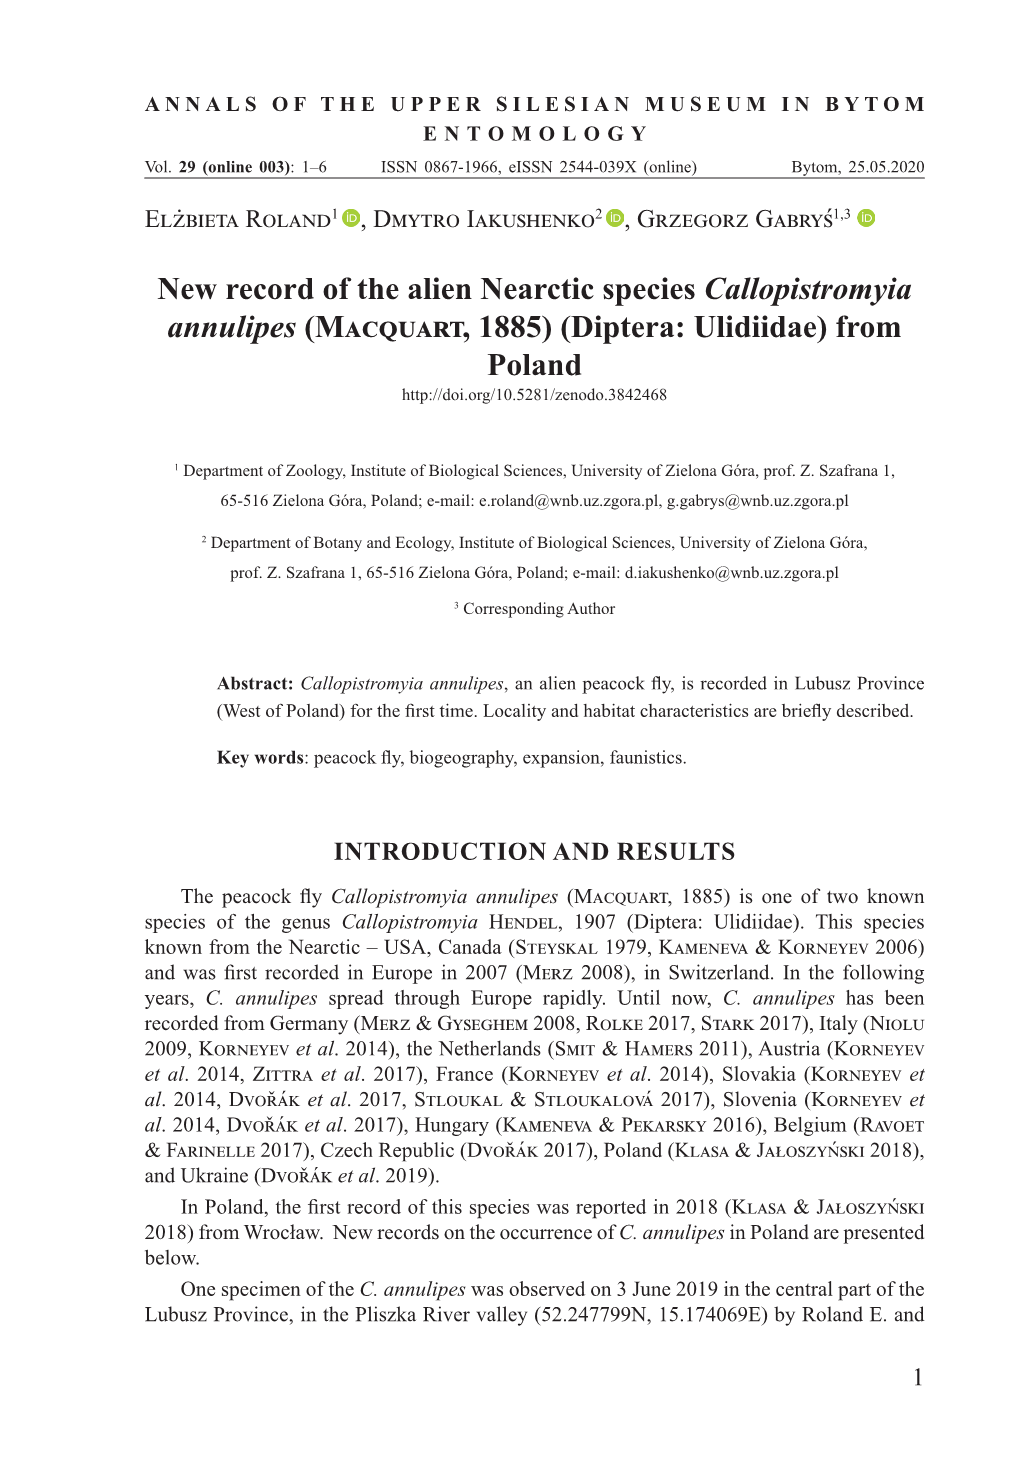 New Record of the Alien Nearctic Species Callopistromyia Annulipes (Macquart, 1885) (Diptera: Ulidiidae) from Poland